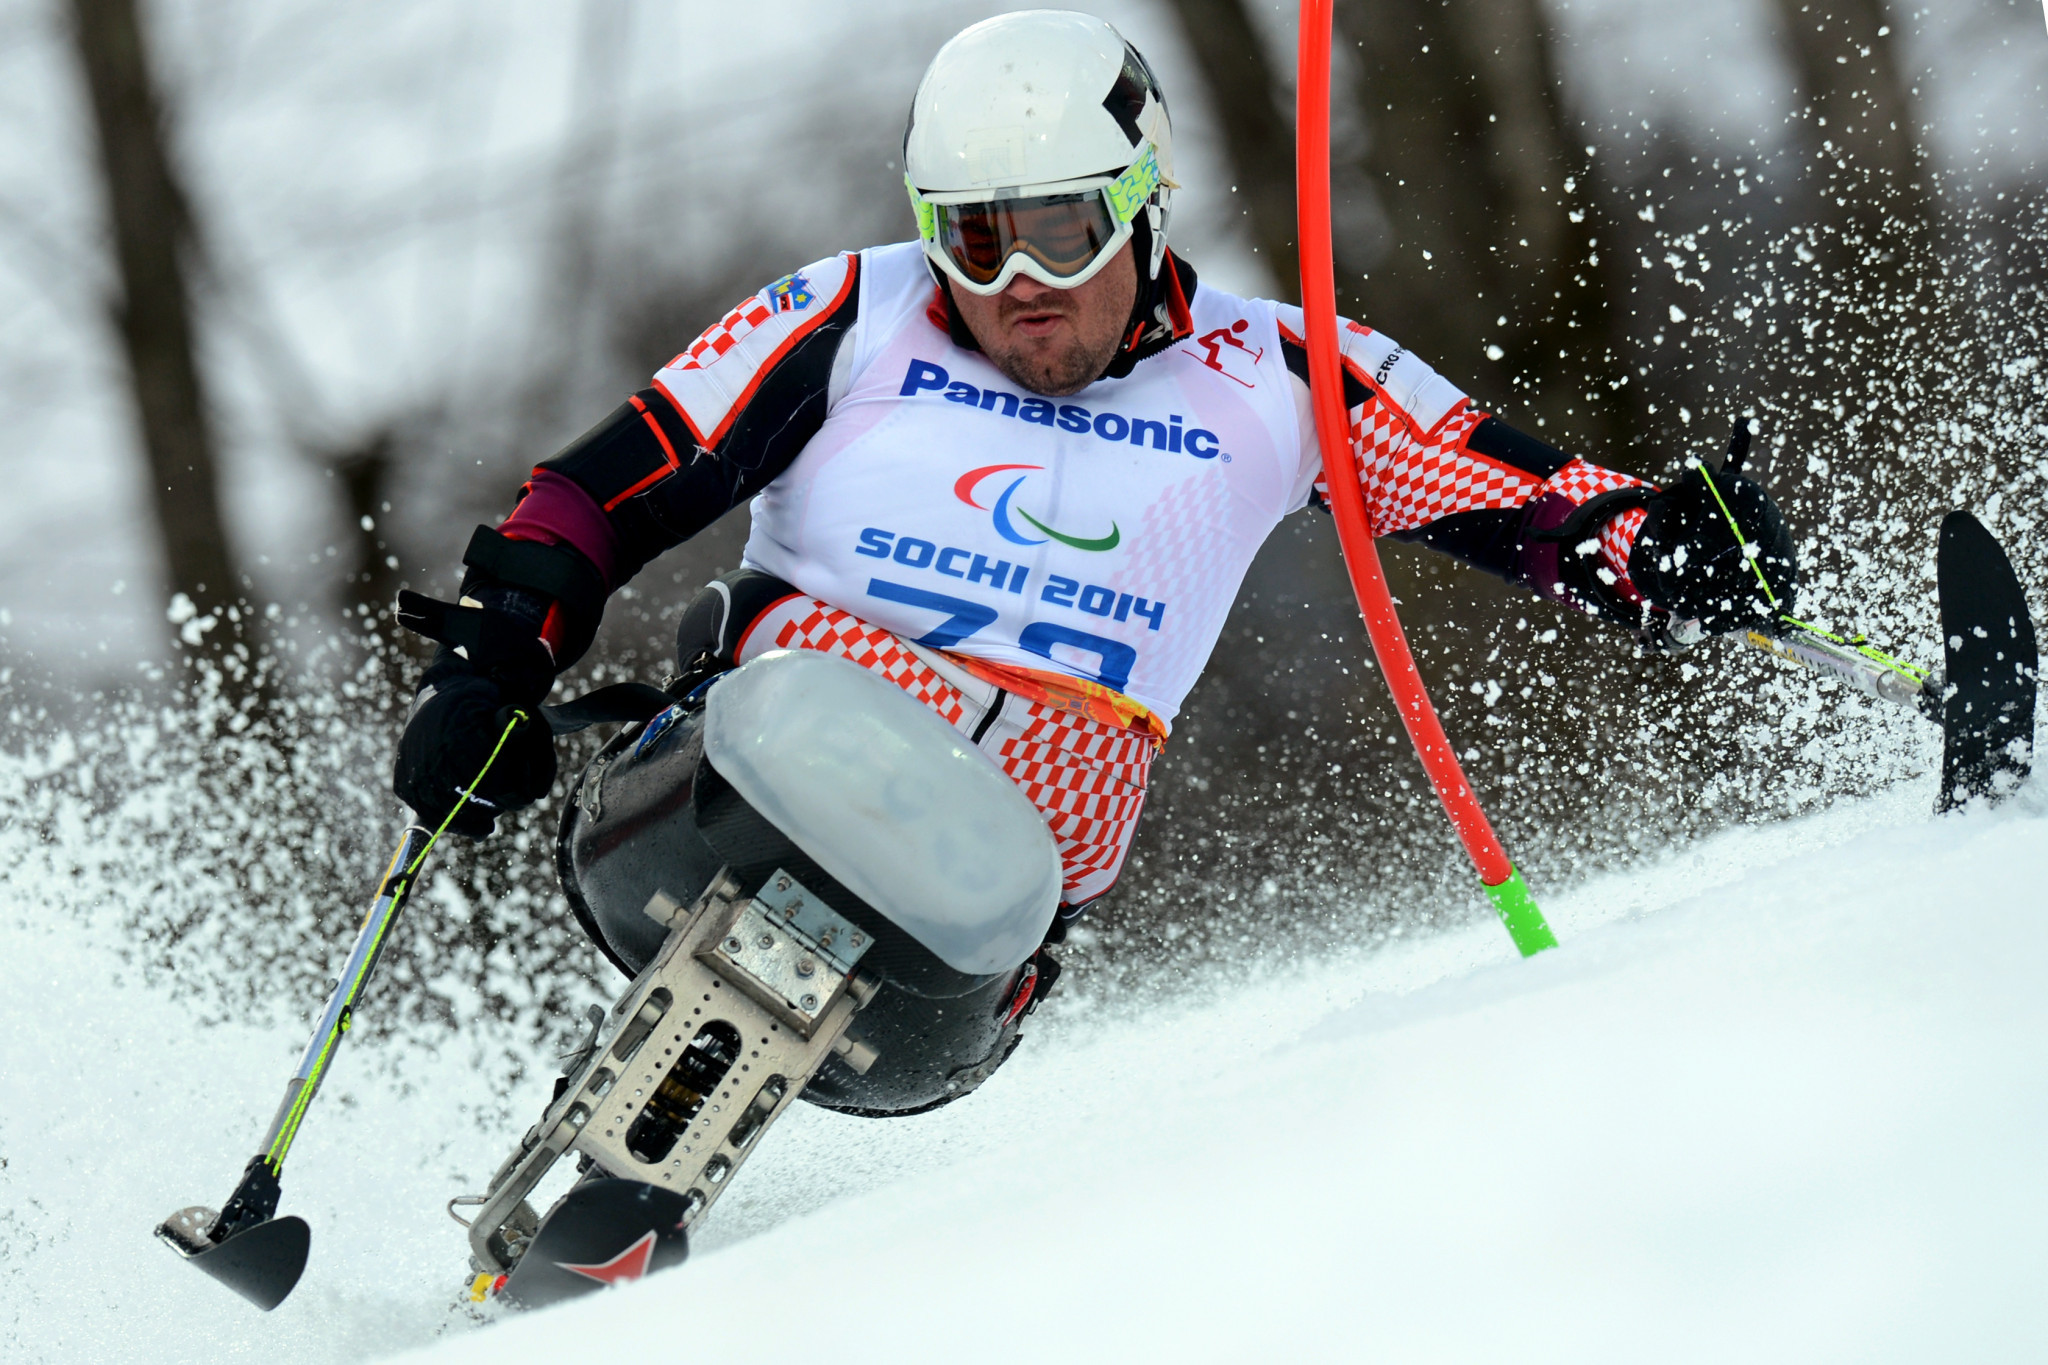 Sokolovic secures first World Para Alpine Skiing World Cup win in almost two years